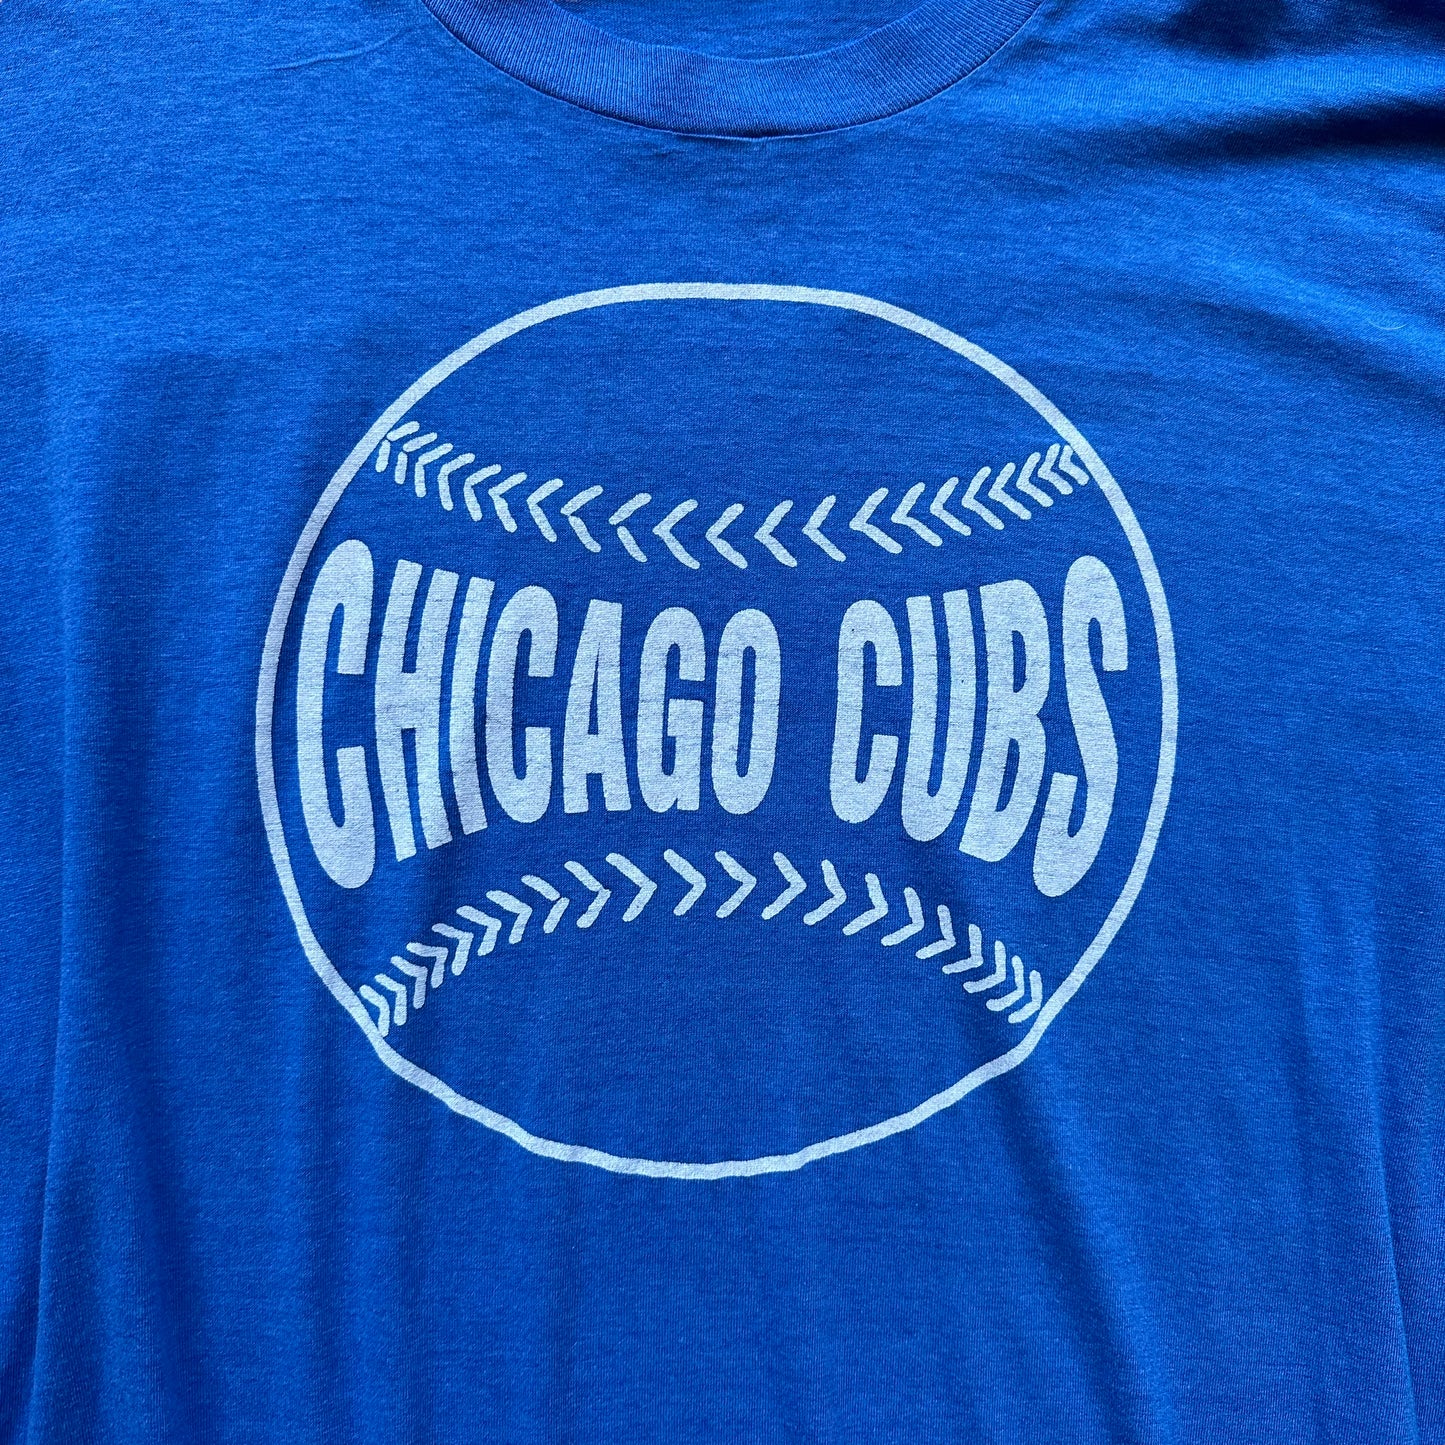 Front Detail on Vintage Chicago Cubs Tee SZ L | Vintage Baseball T-Shirts Seattle | Barn Owl Vintage Tees Seattle